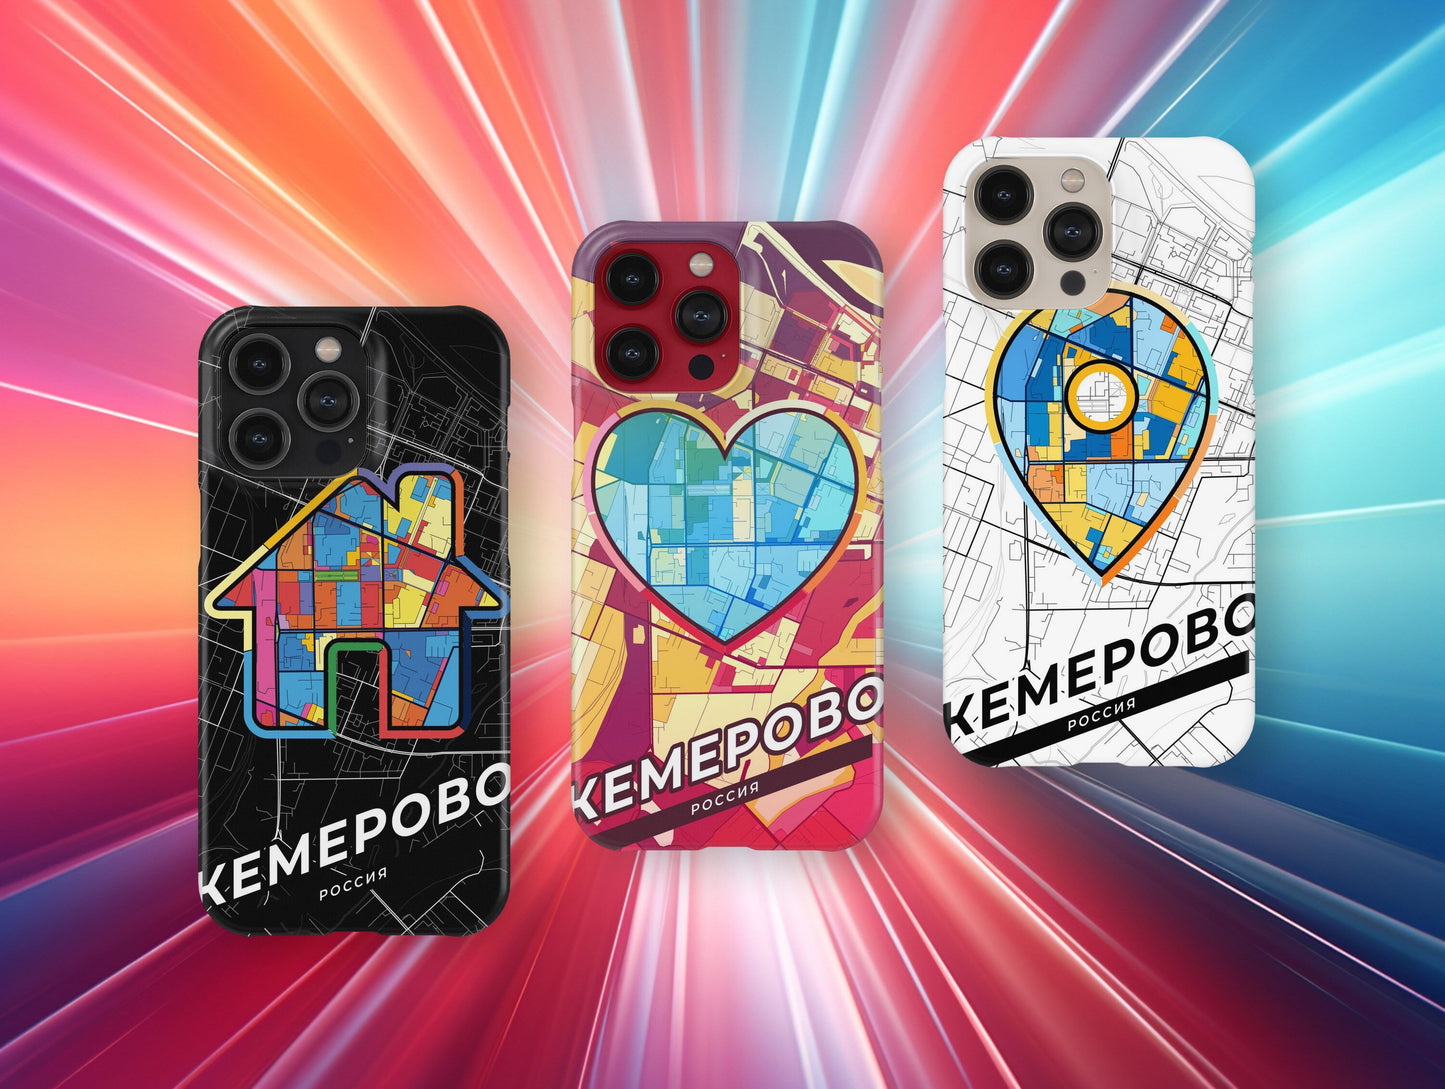 Kemerovo Russia slim phone case with colorful icon. Birthday, wedding or housewarming gift. Couple match cases.